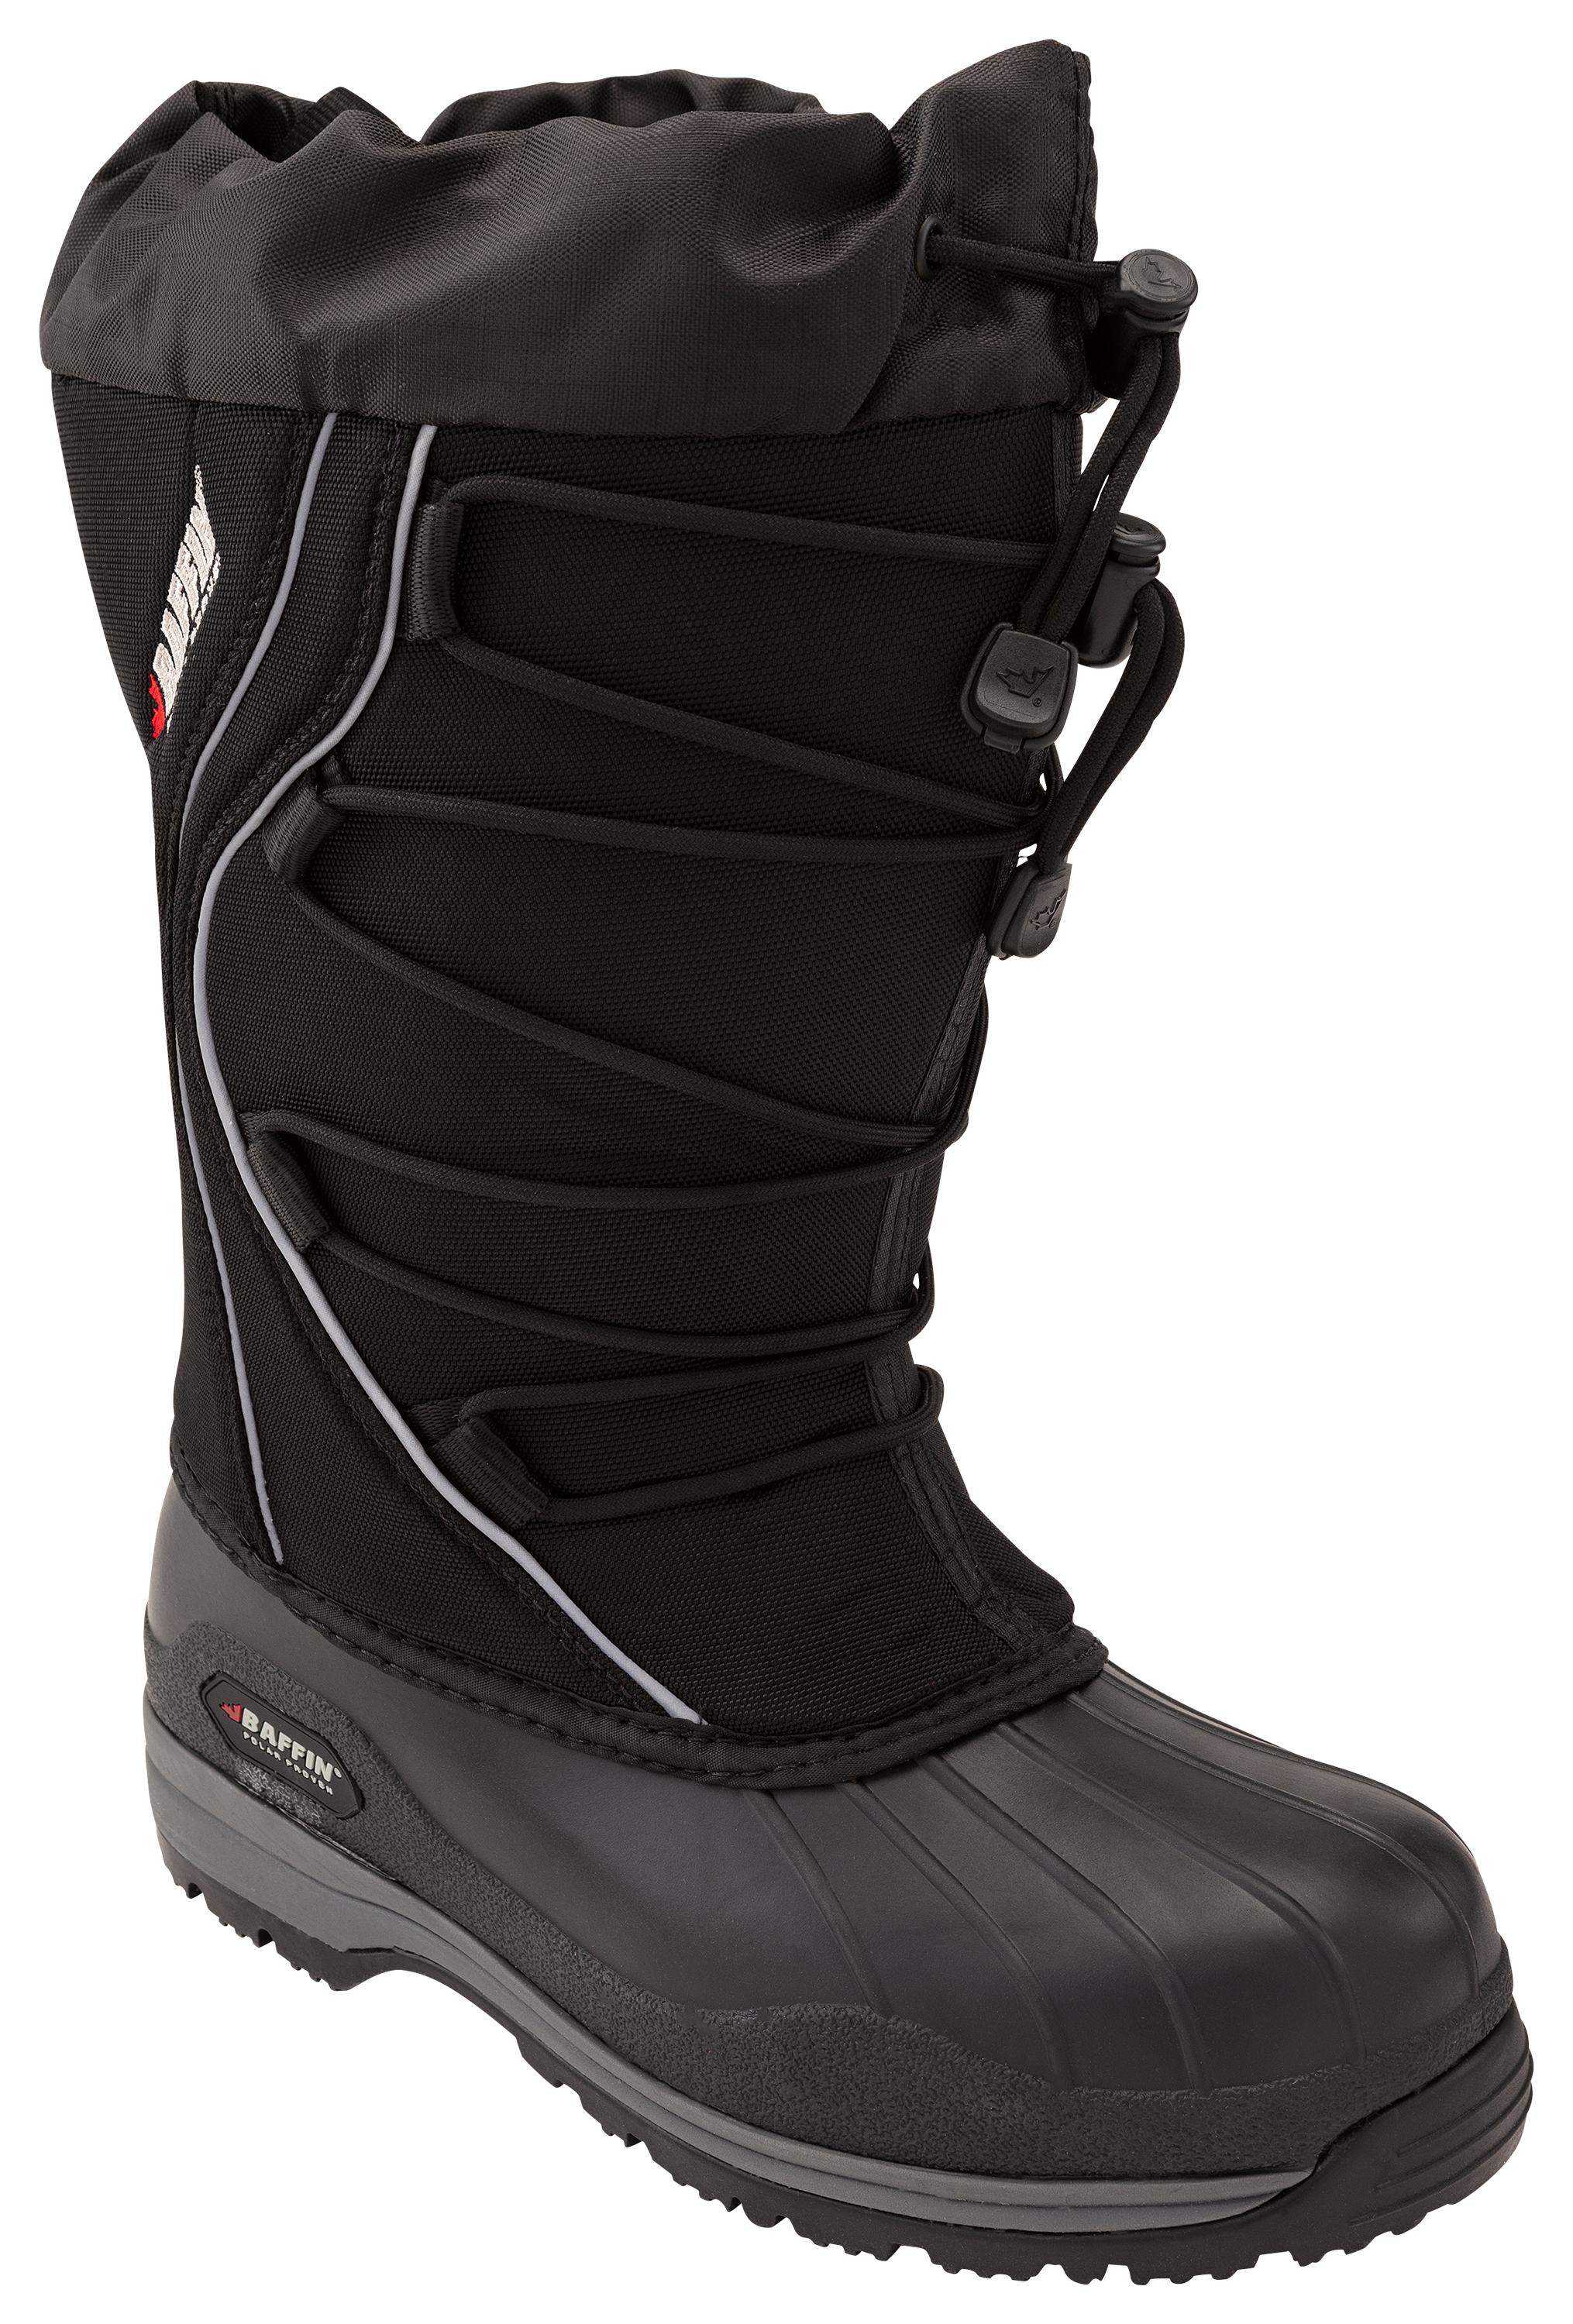 Baffin Icefield Pac Boots for Ladies - Black - 6M